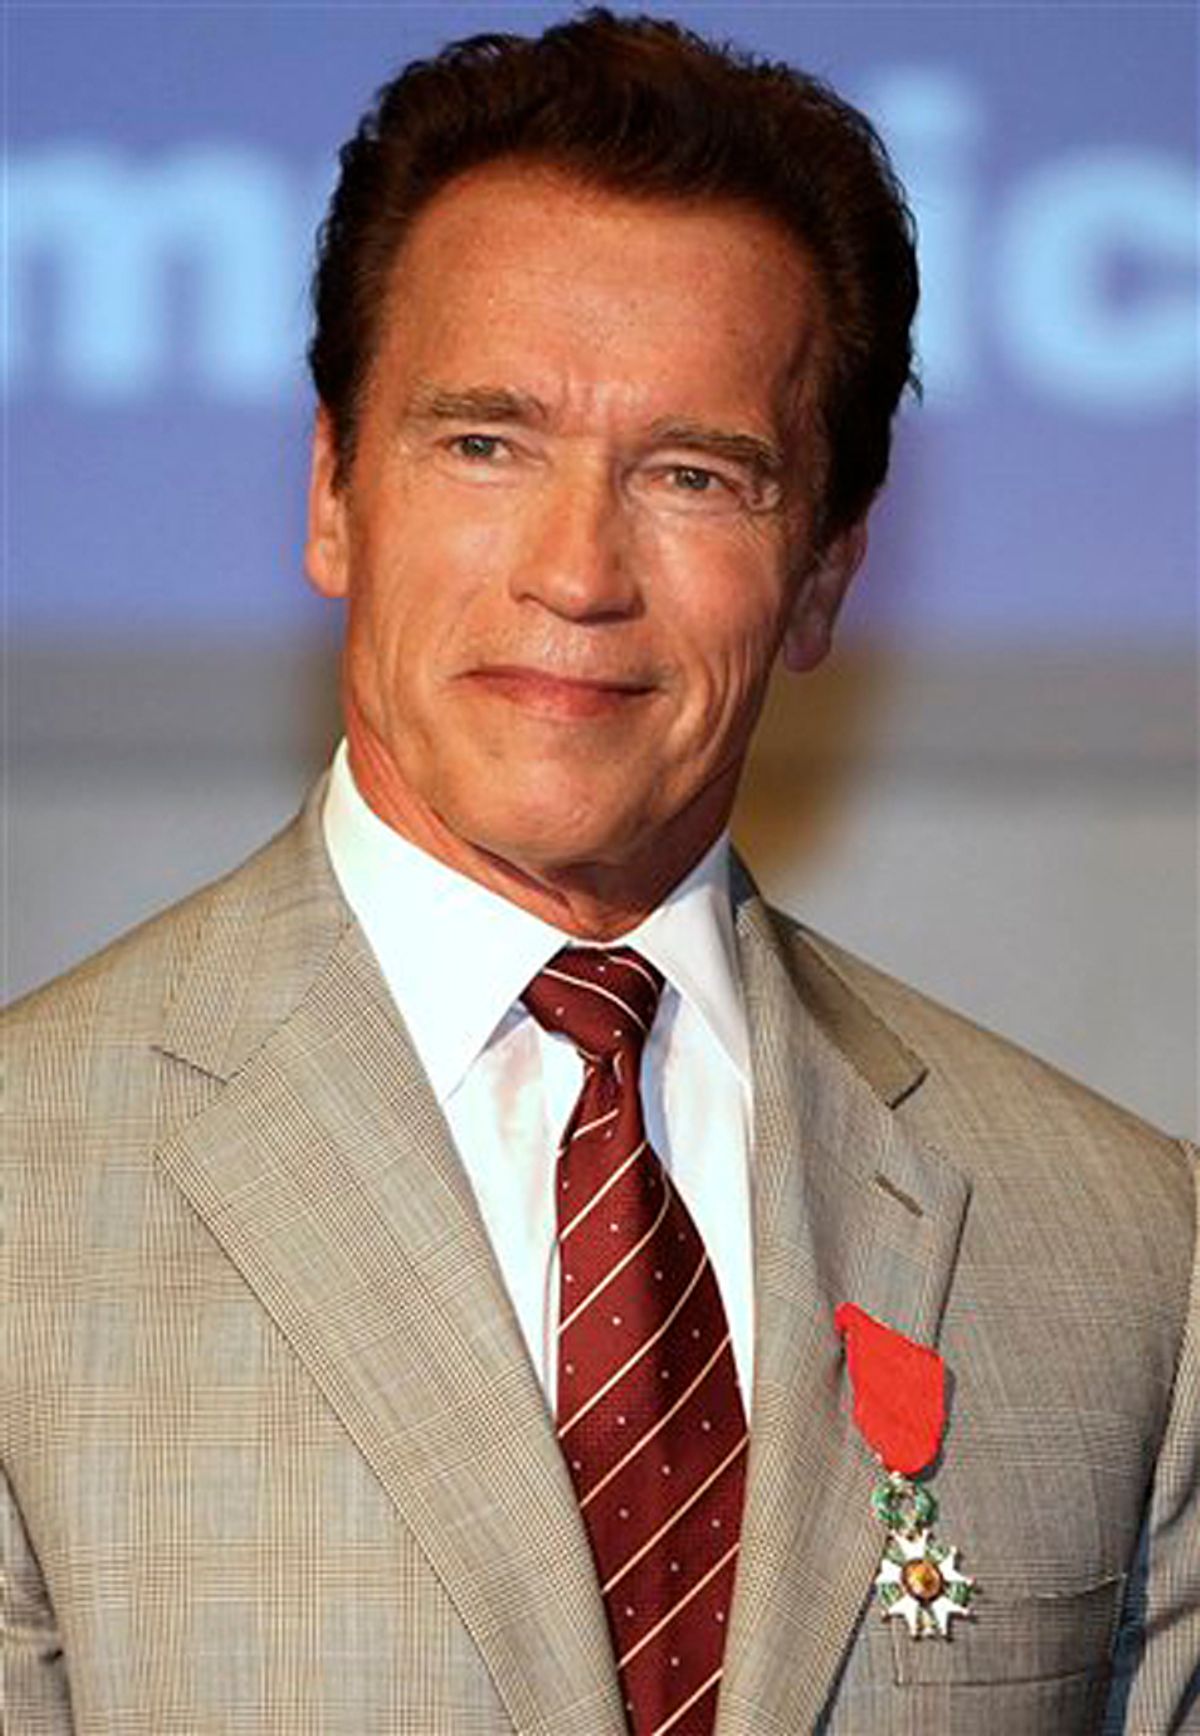 Austrian-American, actor and former California Governor Arnold Schwarzenegger, poses after receiving the insignia of Chevalier in the Order of the Legion of Honor  during the MIPTV (International Television Programme Market), Monday, April 4, 2011, in Cannes, southern France. Arnold Schwarzenegger is back in Cannes for the first time in eight years to unveil a new international television series "The Governator". (AP Photo/Lionel Cironneau) (Lionel Cironneau)